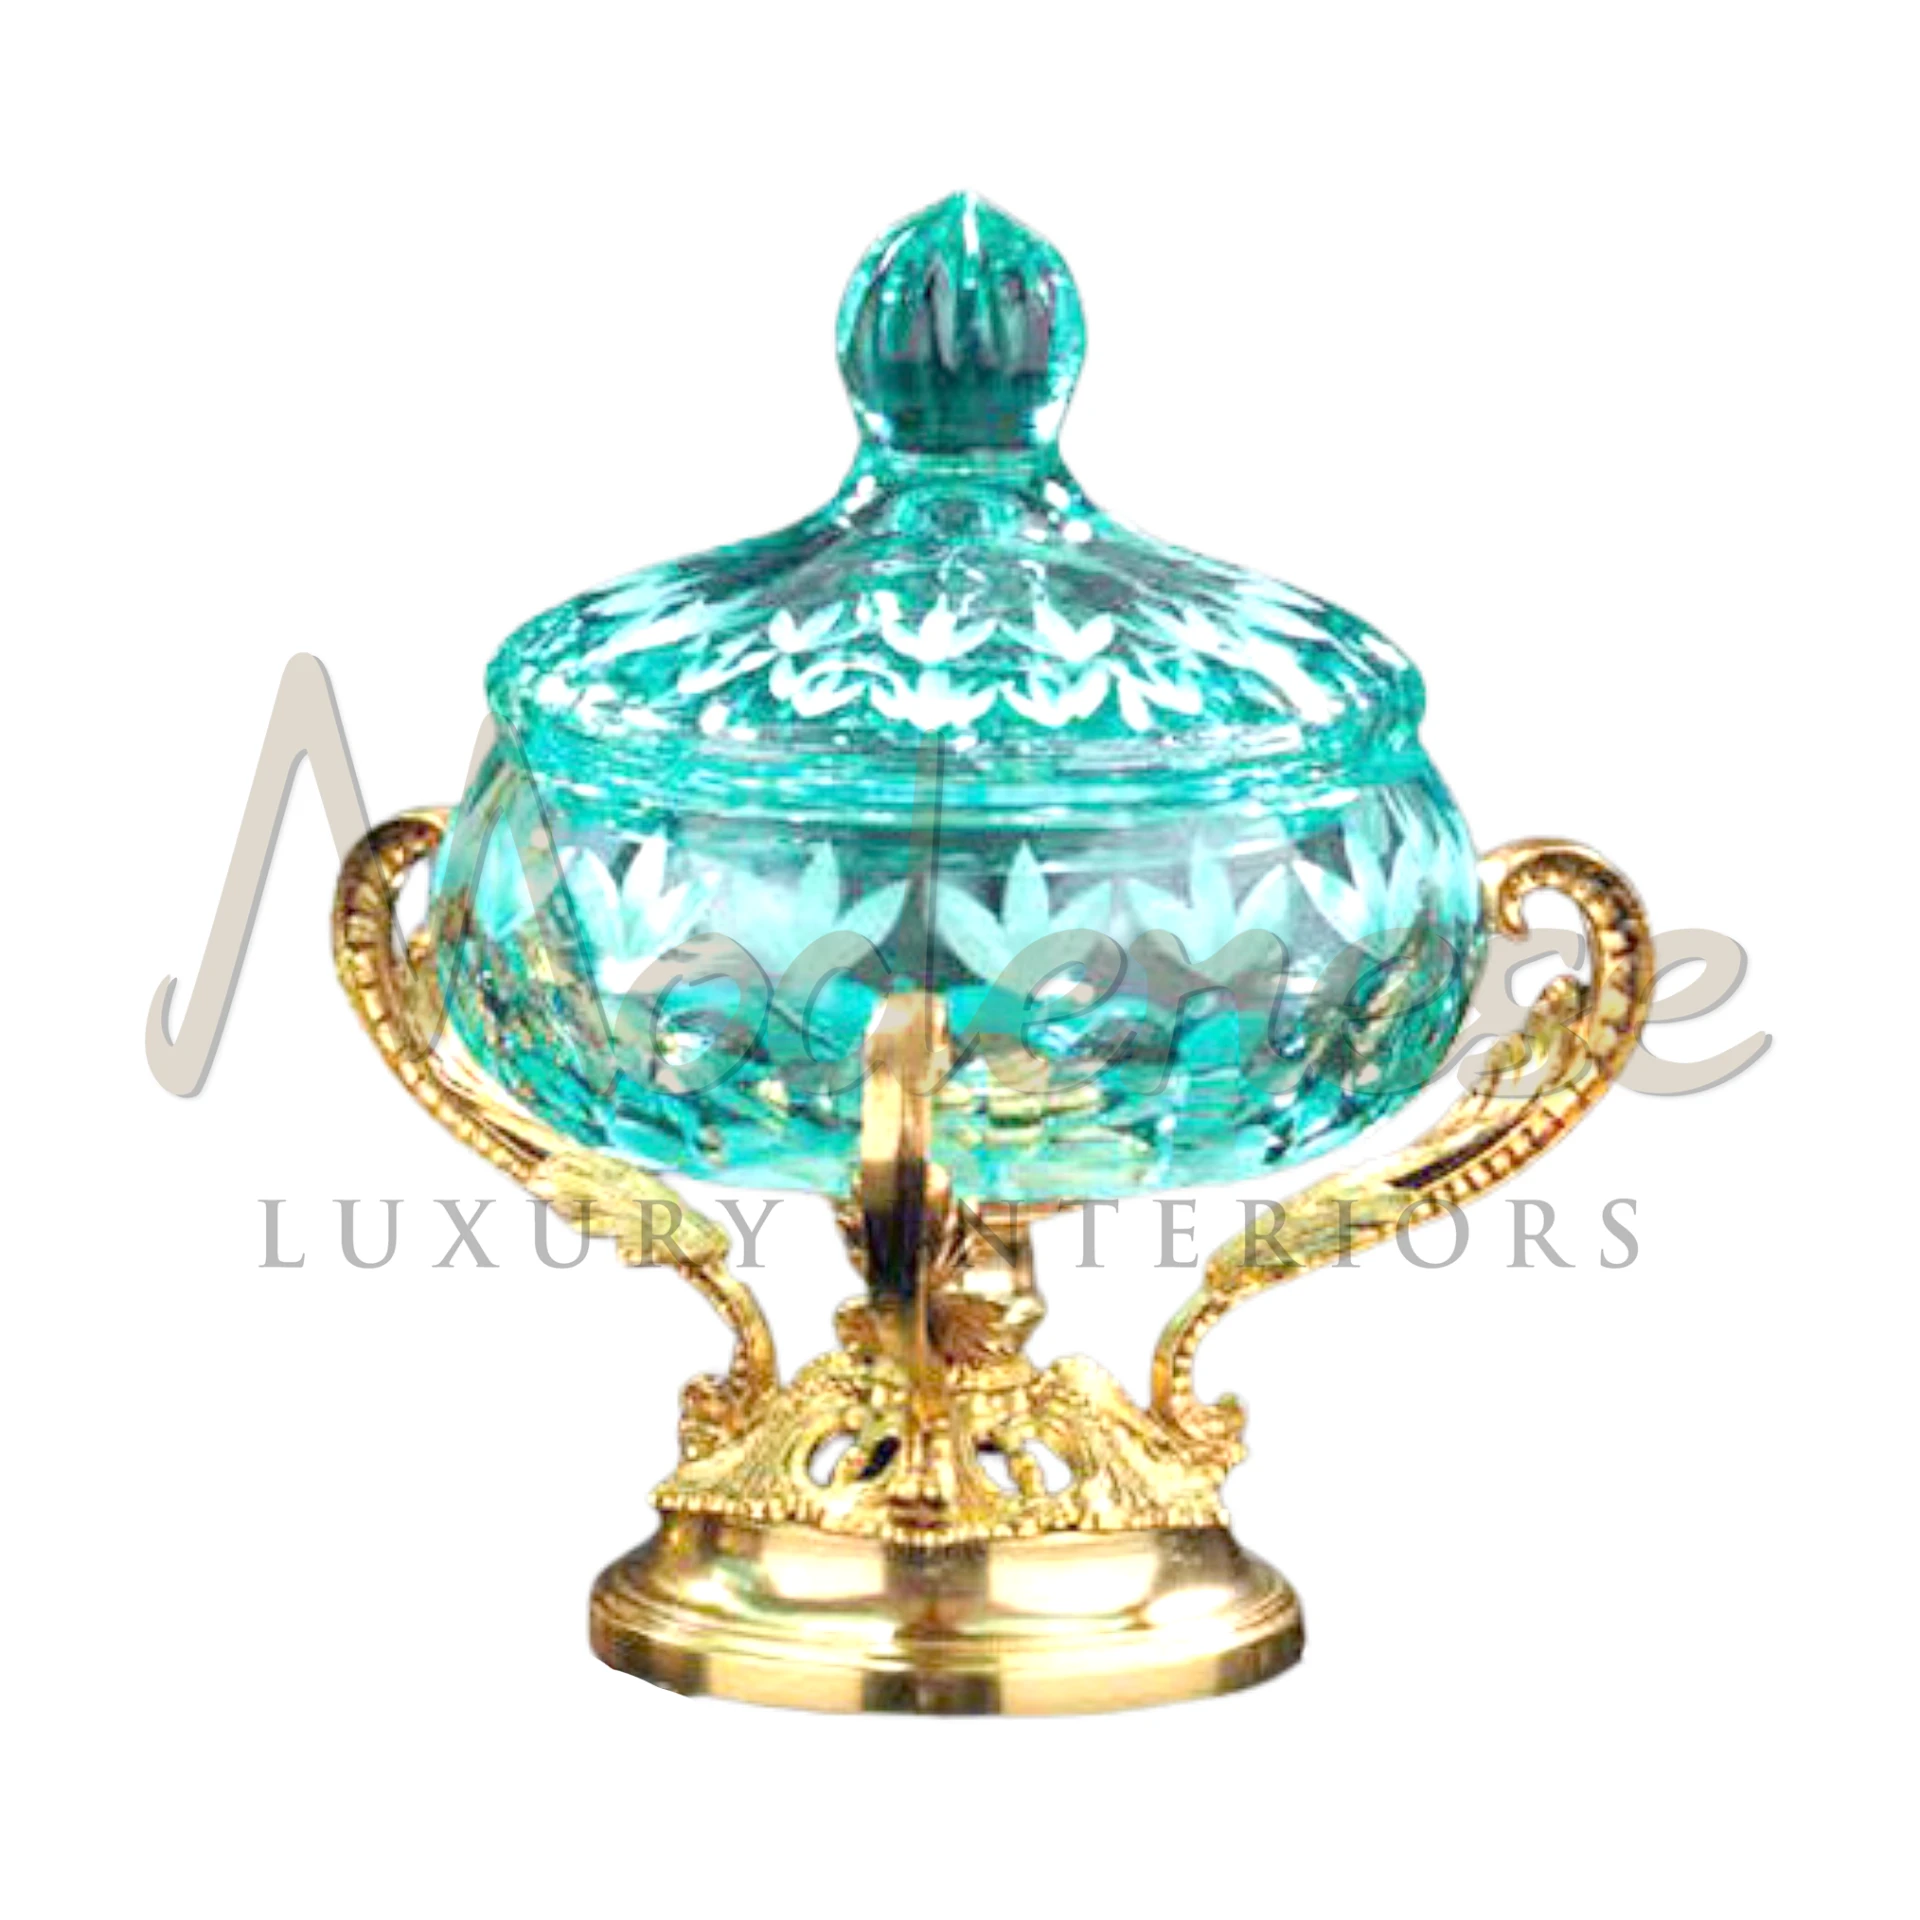 Elegant Turquoise Bowl, crafted with intricate designs in fine materials, showcases refined elegance for sophisticated luxury interior designs.